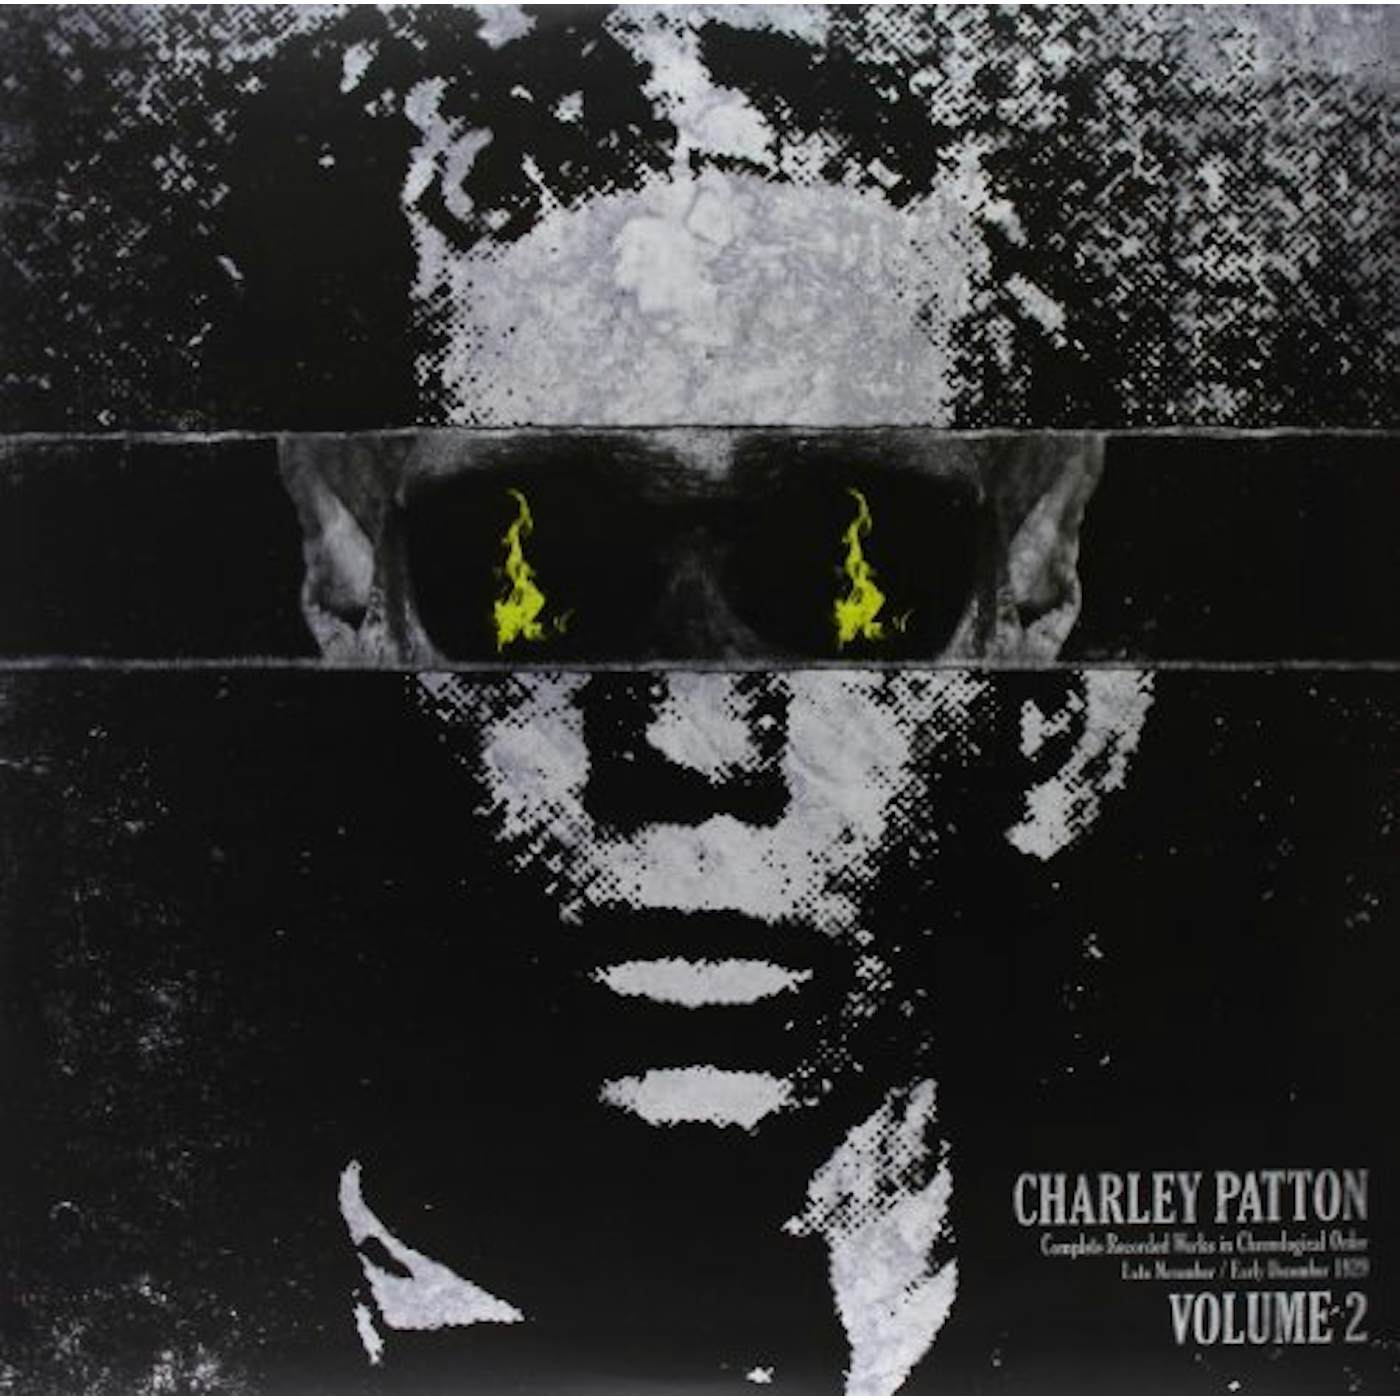 Charley Patton COMPLETE RECORDED WORKS IN CHRONOLOGICAL ORDER 2 Vinyl Record